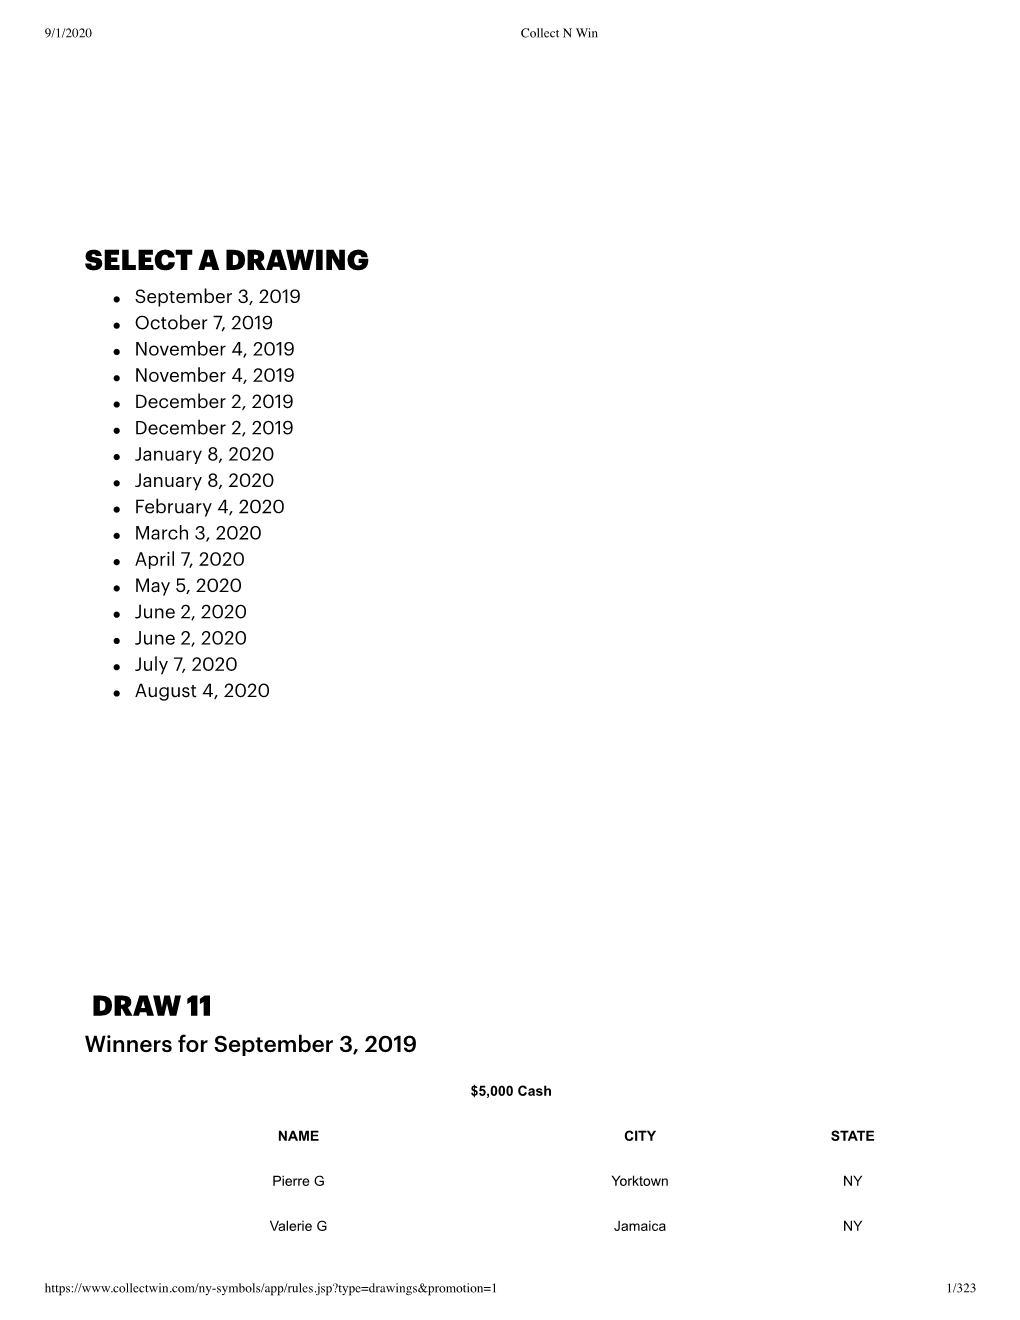 Select a Drawing